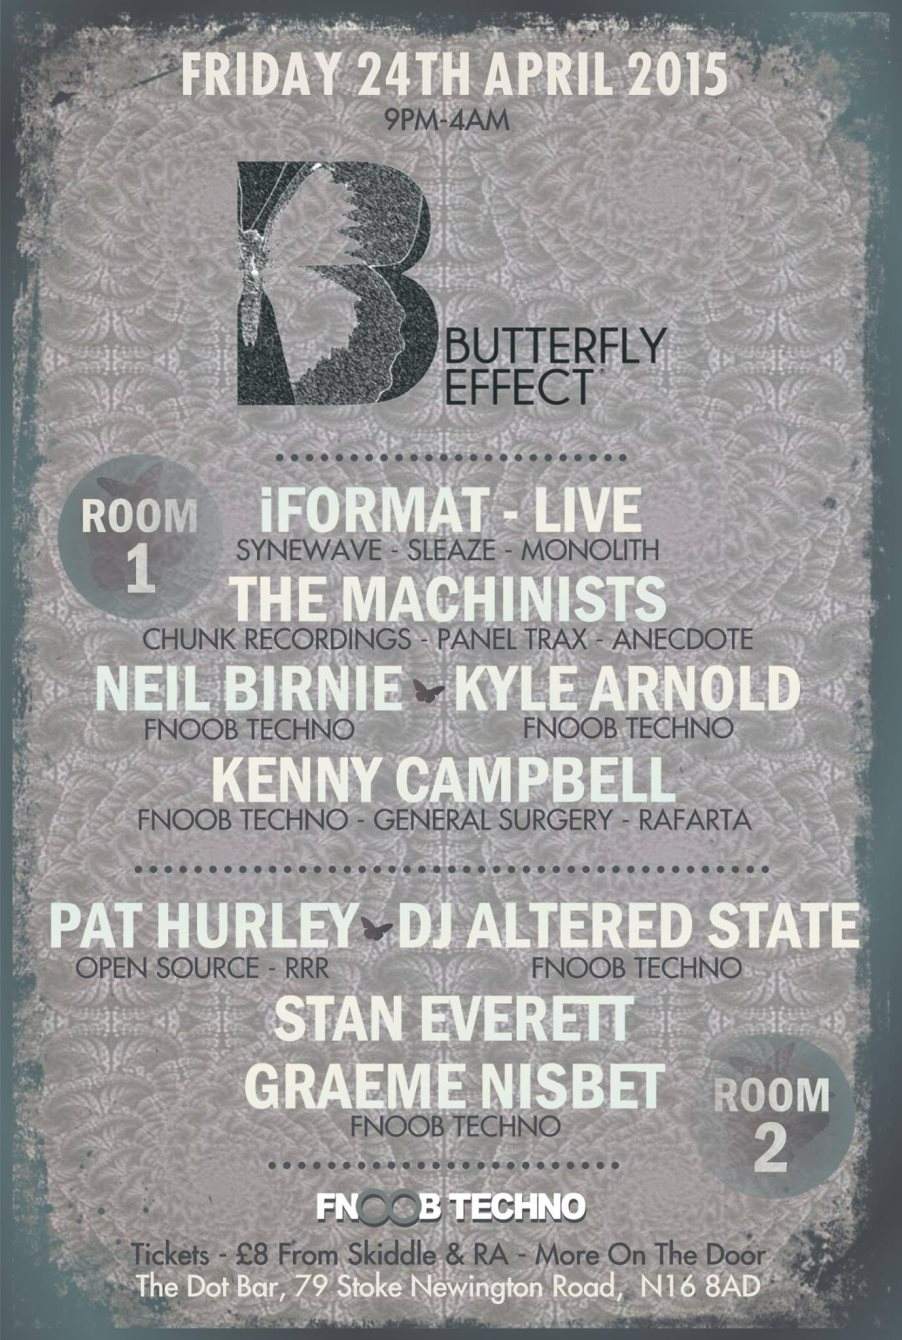 Butterfly Effect #4 presents Iformat Live //Neil Birnie//The Machinists//Kenny Campbell - Página frontal